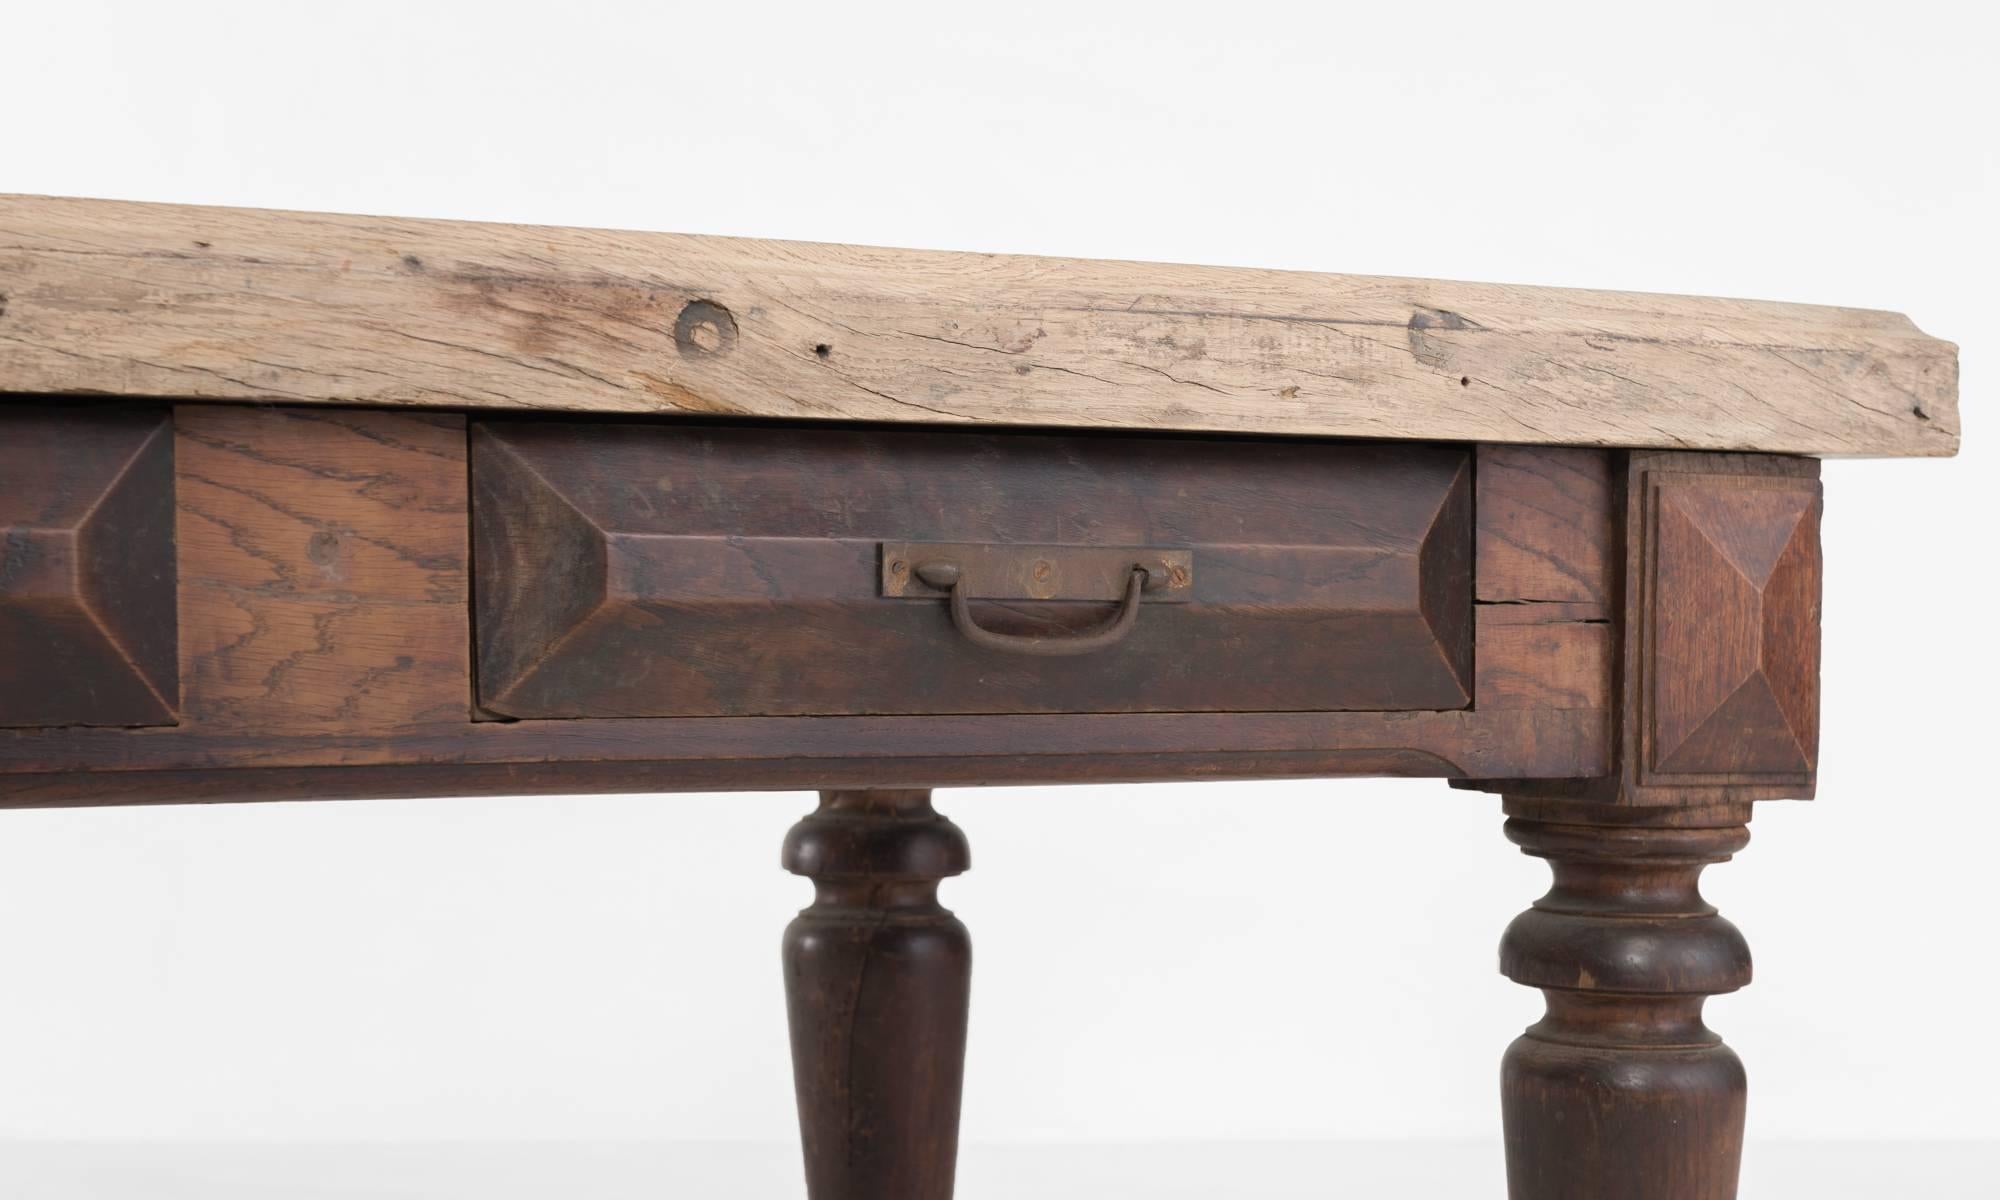 Hand-Crafted French Oak Kitchen Table with Drawers, circa 1790